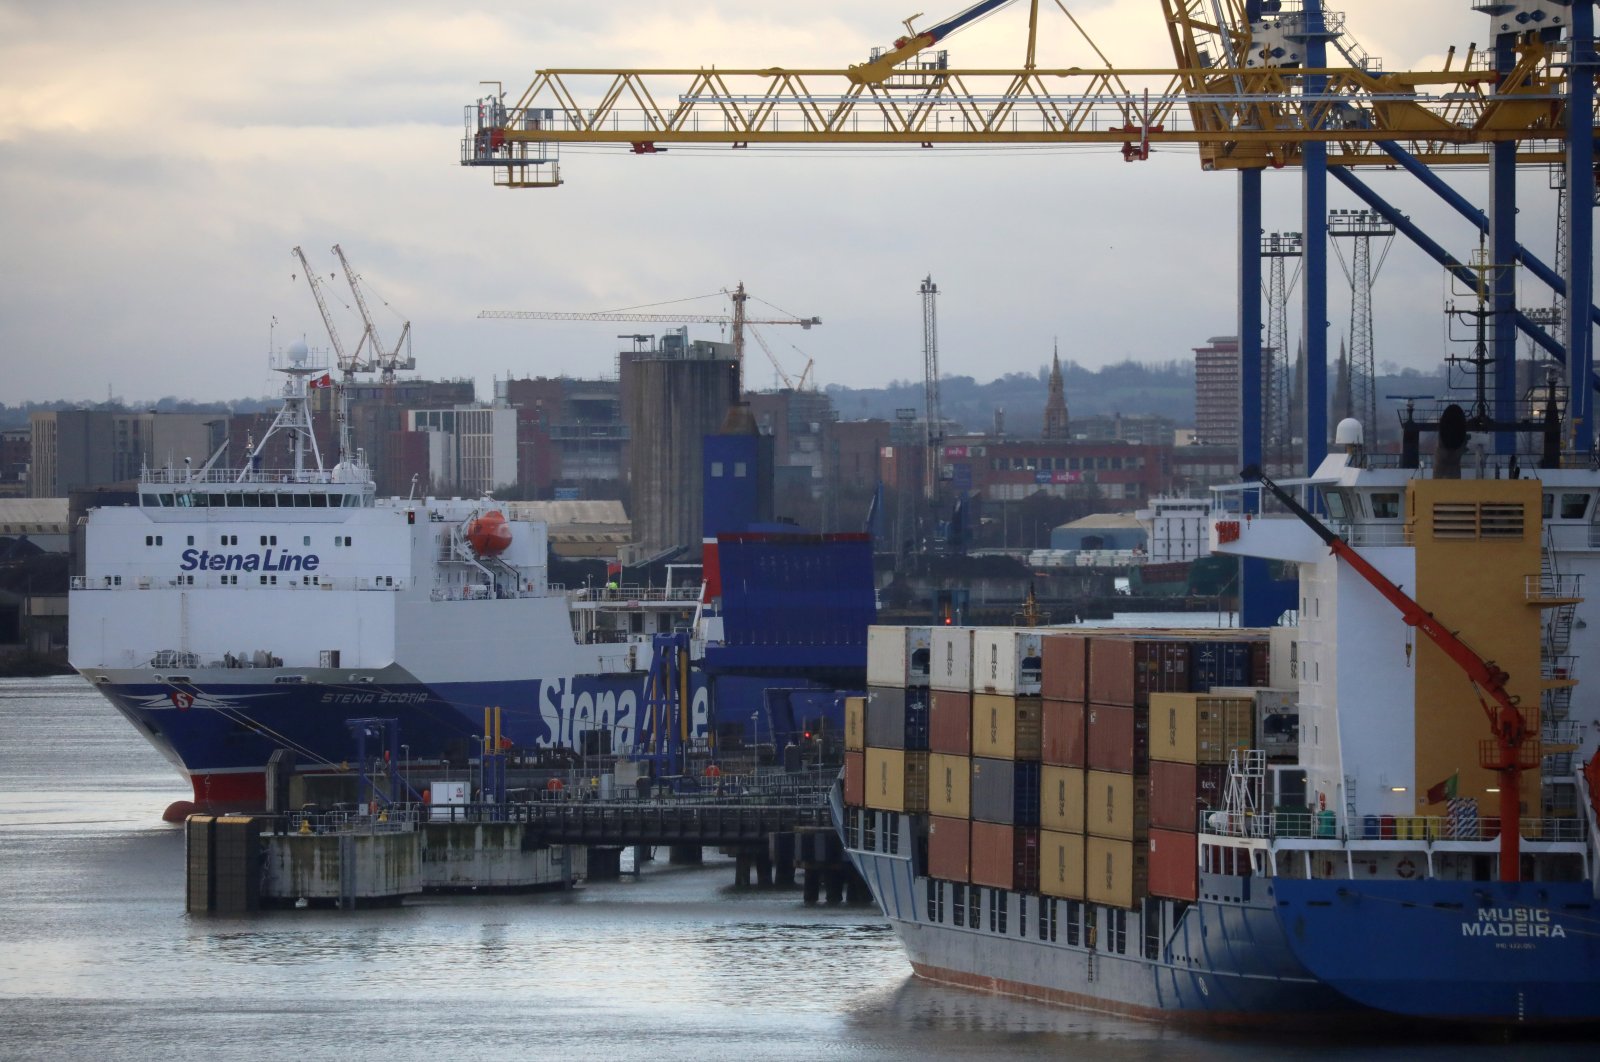 A Stena Line Irish Sea ferry docks next to a container ship at the Port of Belfast, Northern Ireland, Jan. 2, 2021. (Reuters Photo)